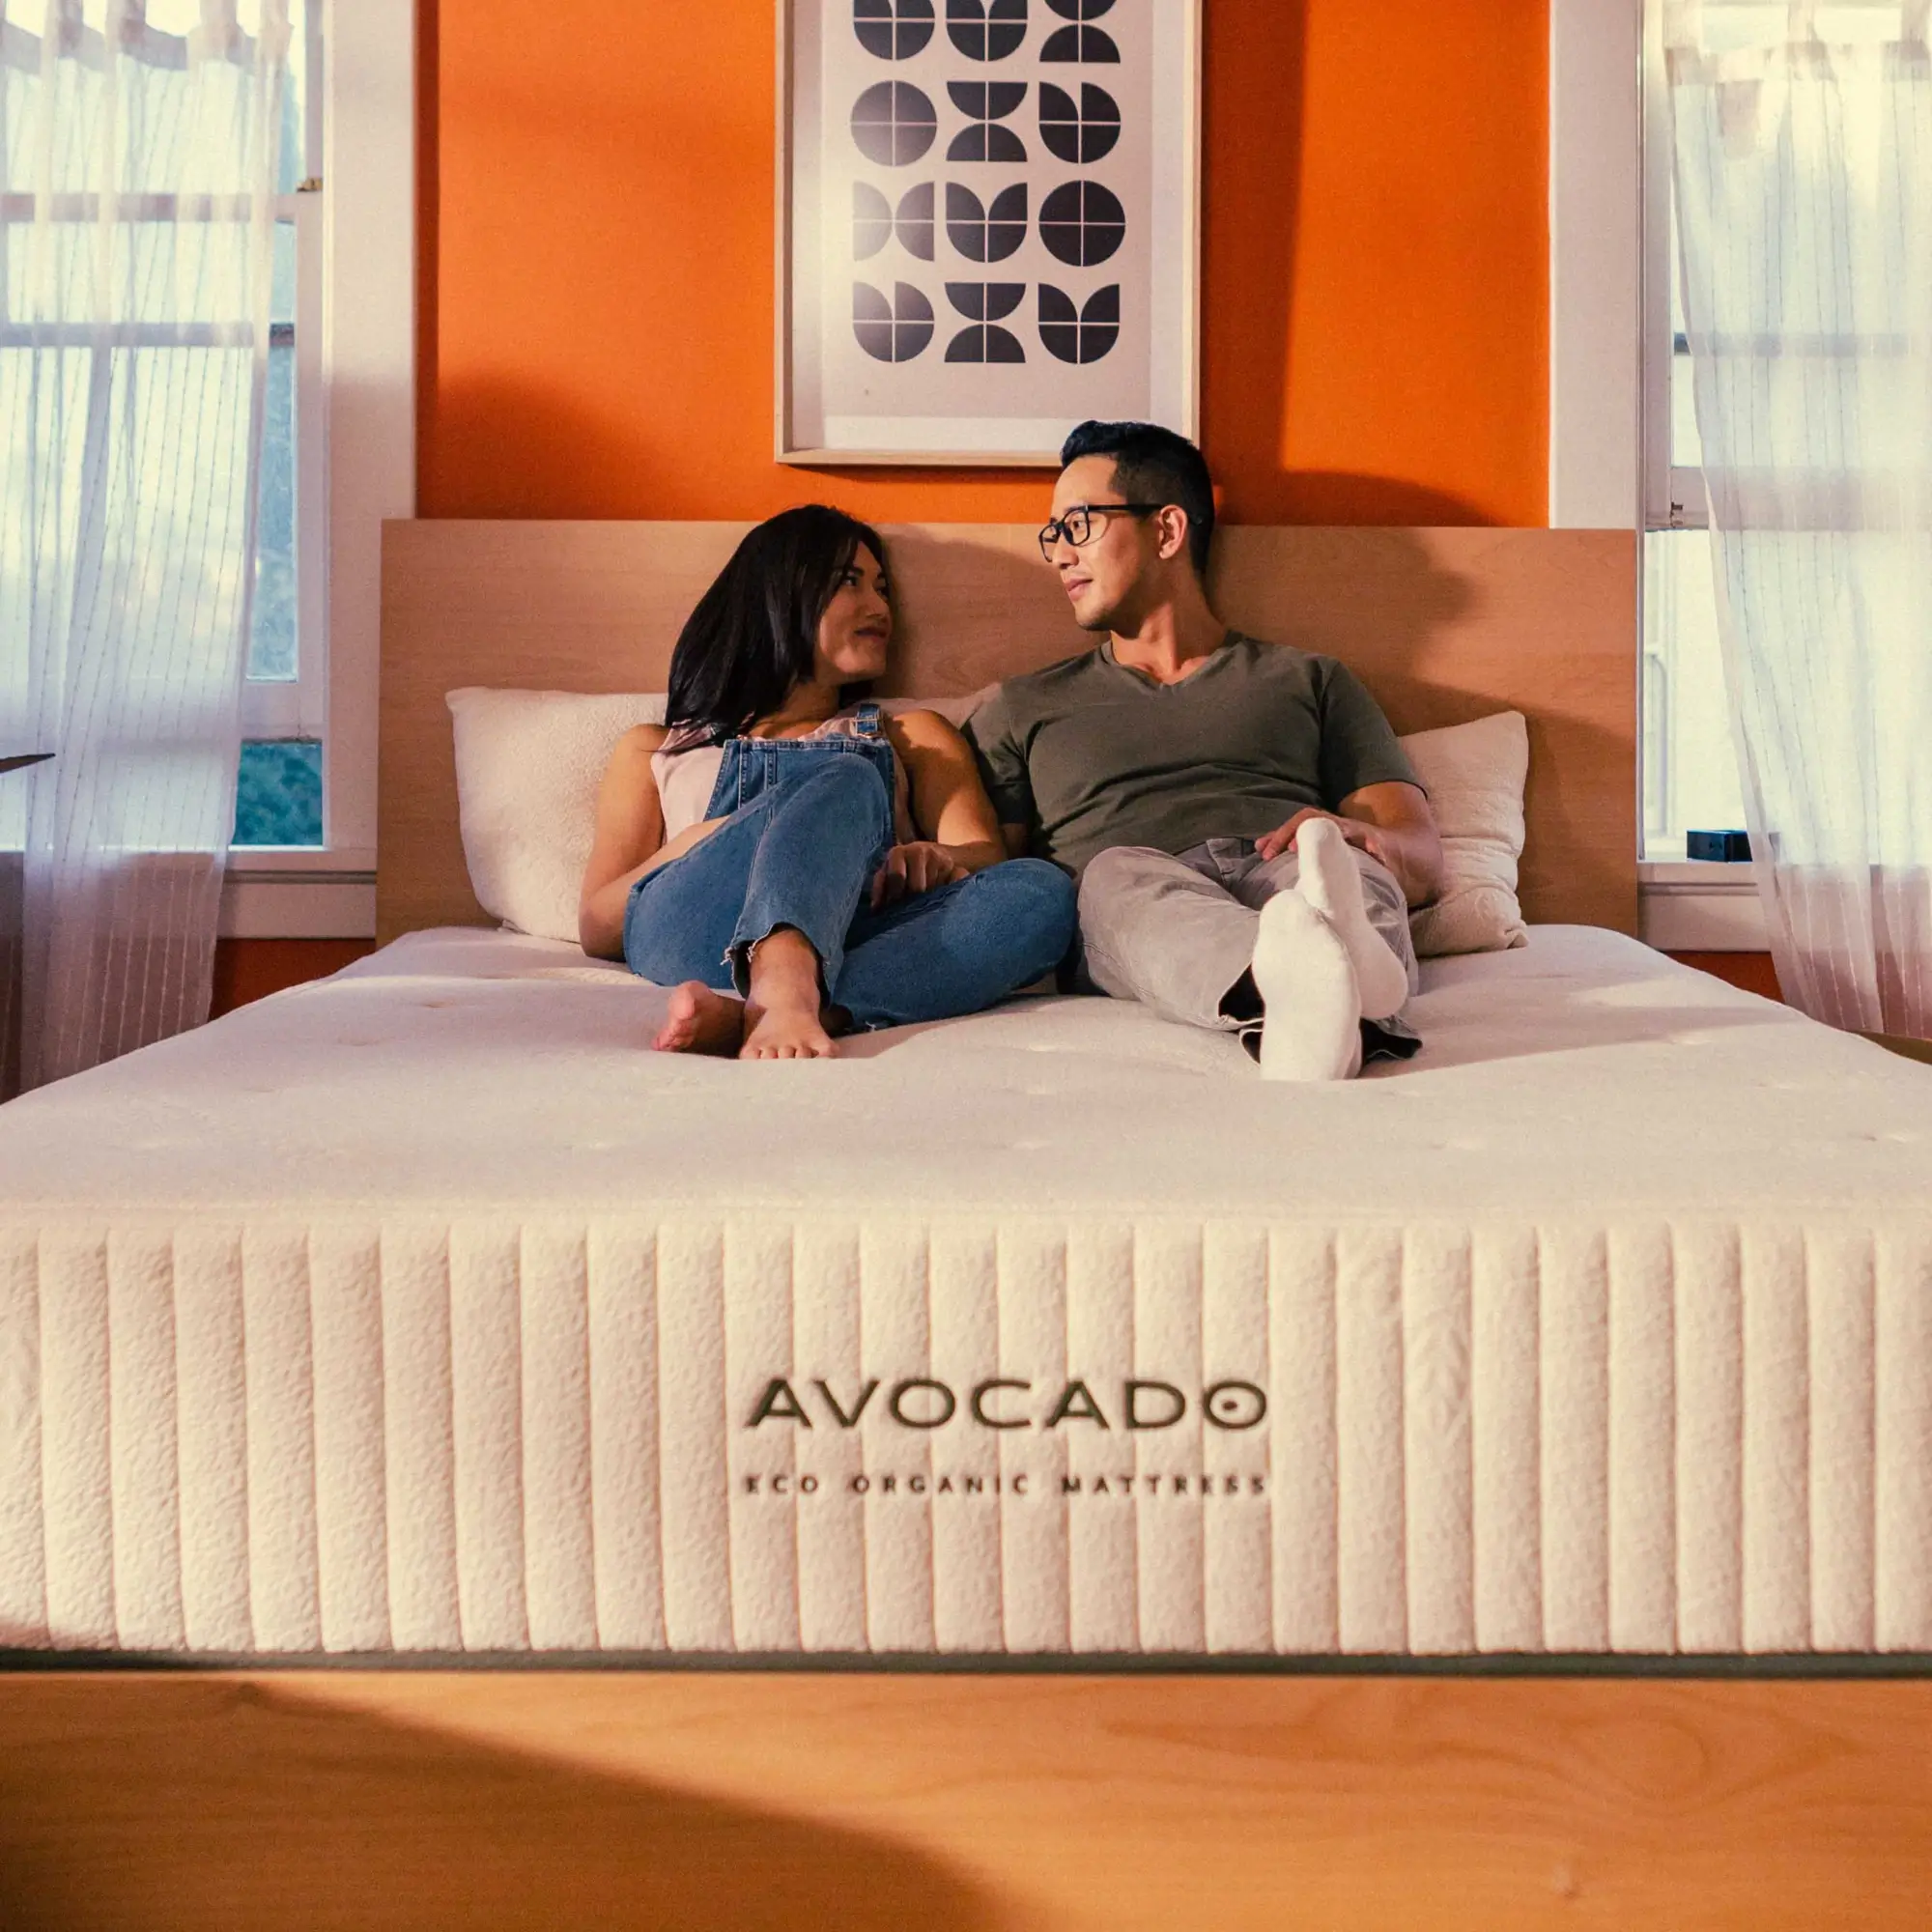 What type of bed frame do I need for the Avocado Eco Organic Mattress?